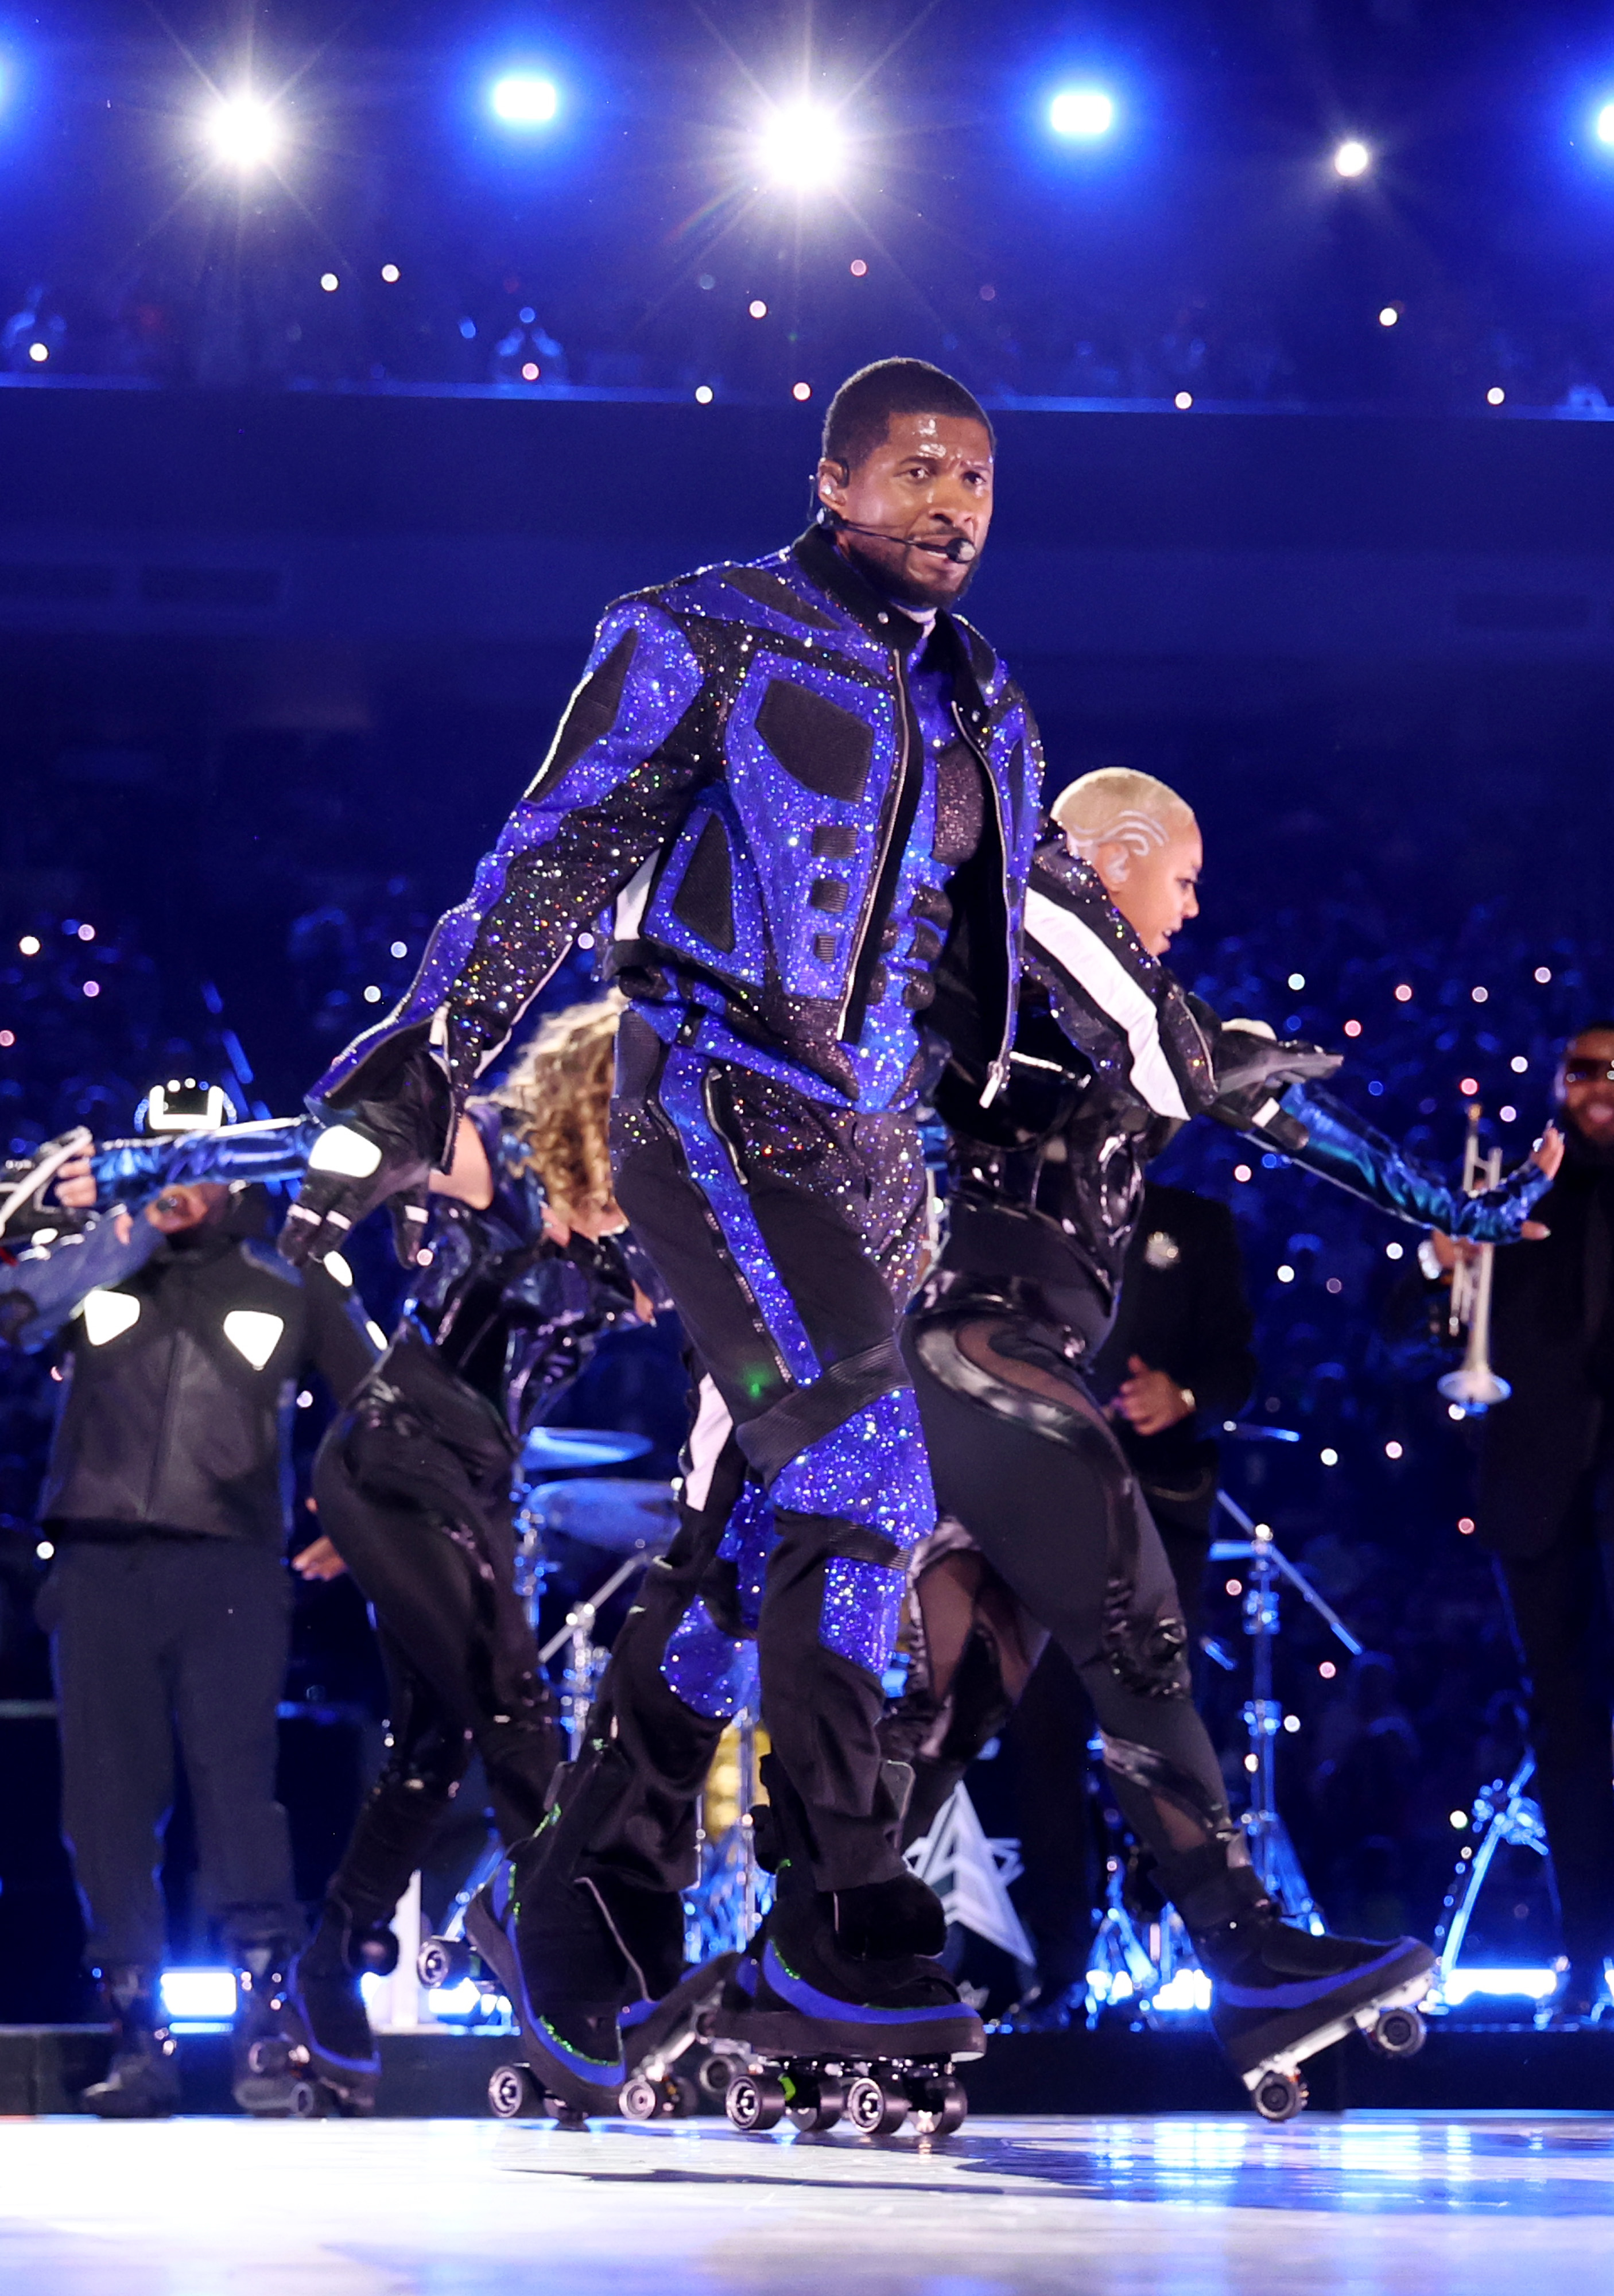 During his halftime performance, Usher also wore roller skates